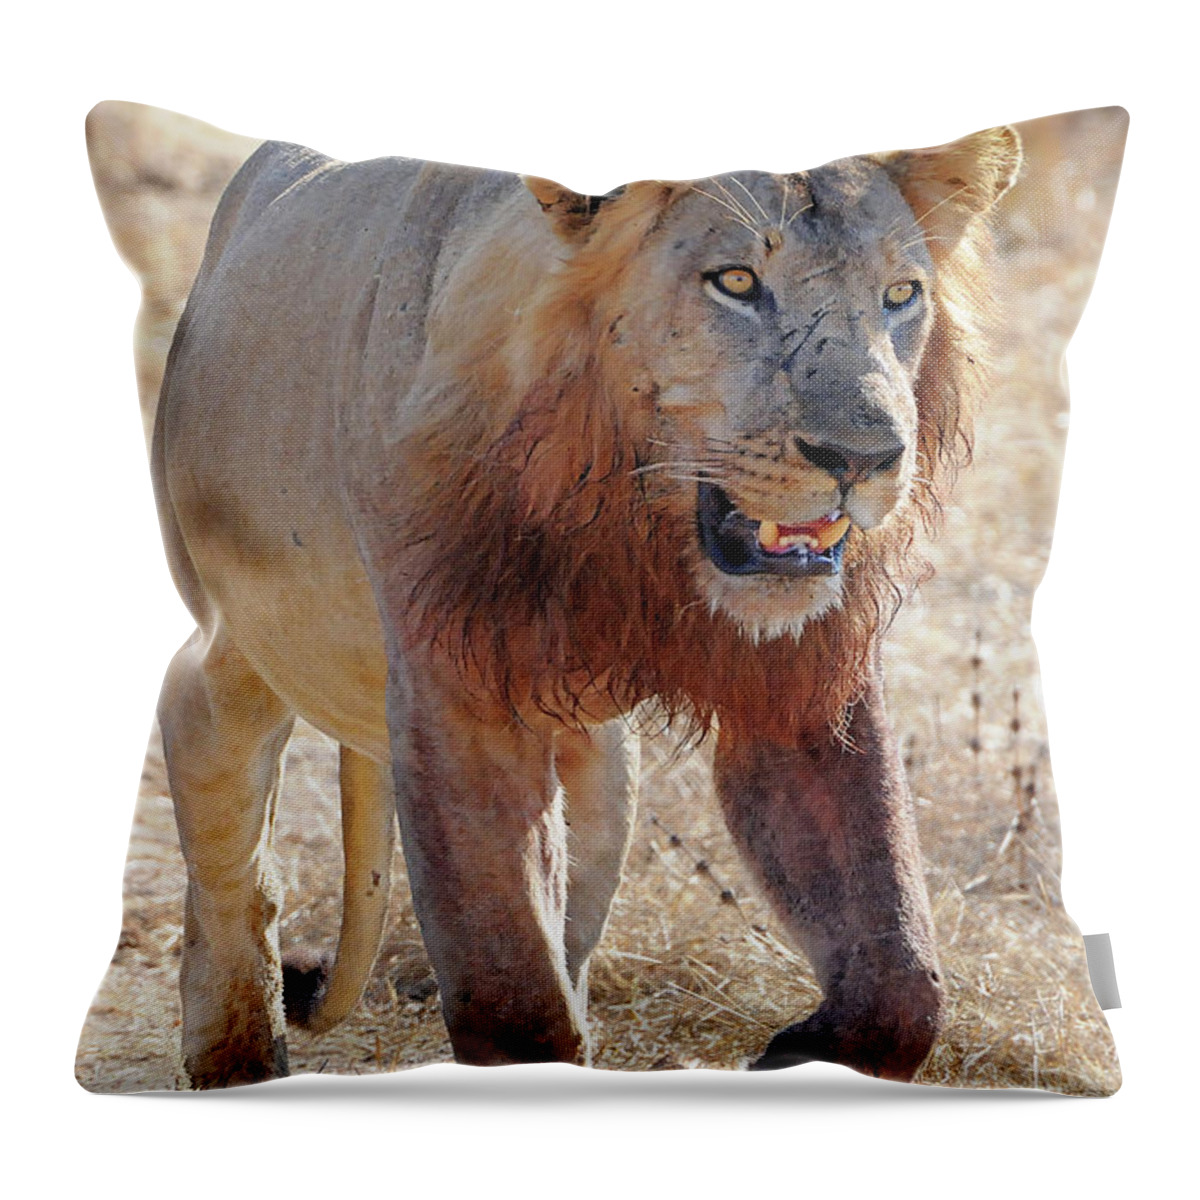 Lion Throw Pillow featuring the photograph Approaching Lion by Ted Keller